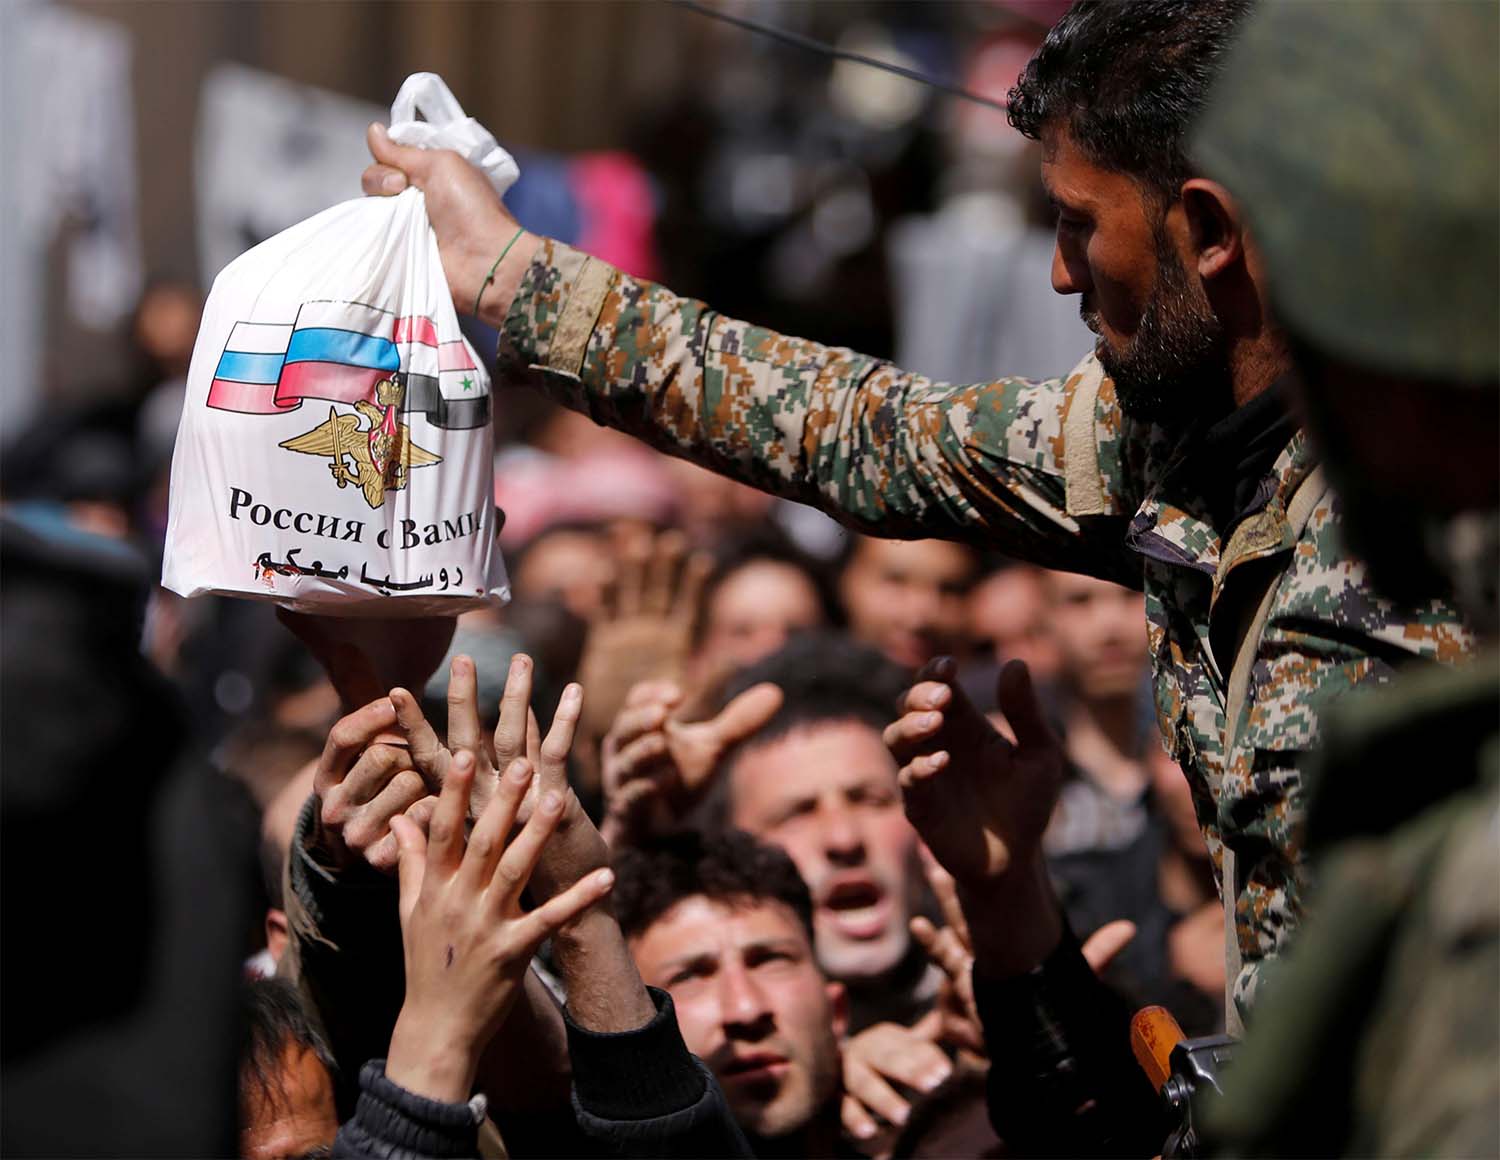 Millions of Syrians rely on food aid